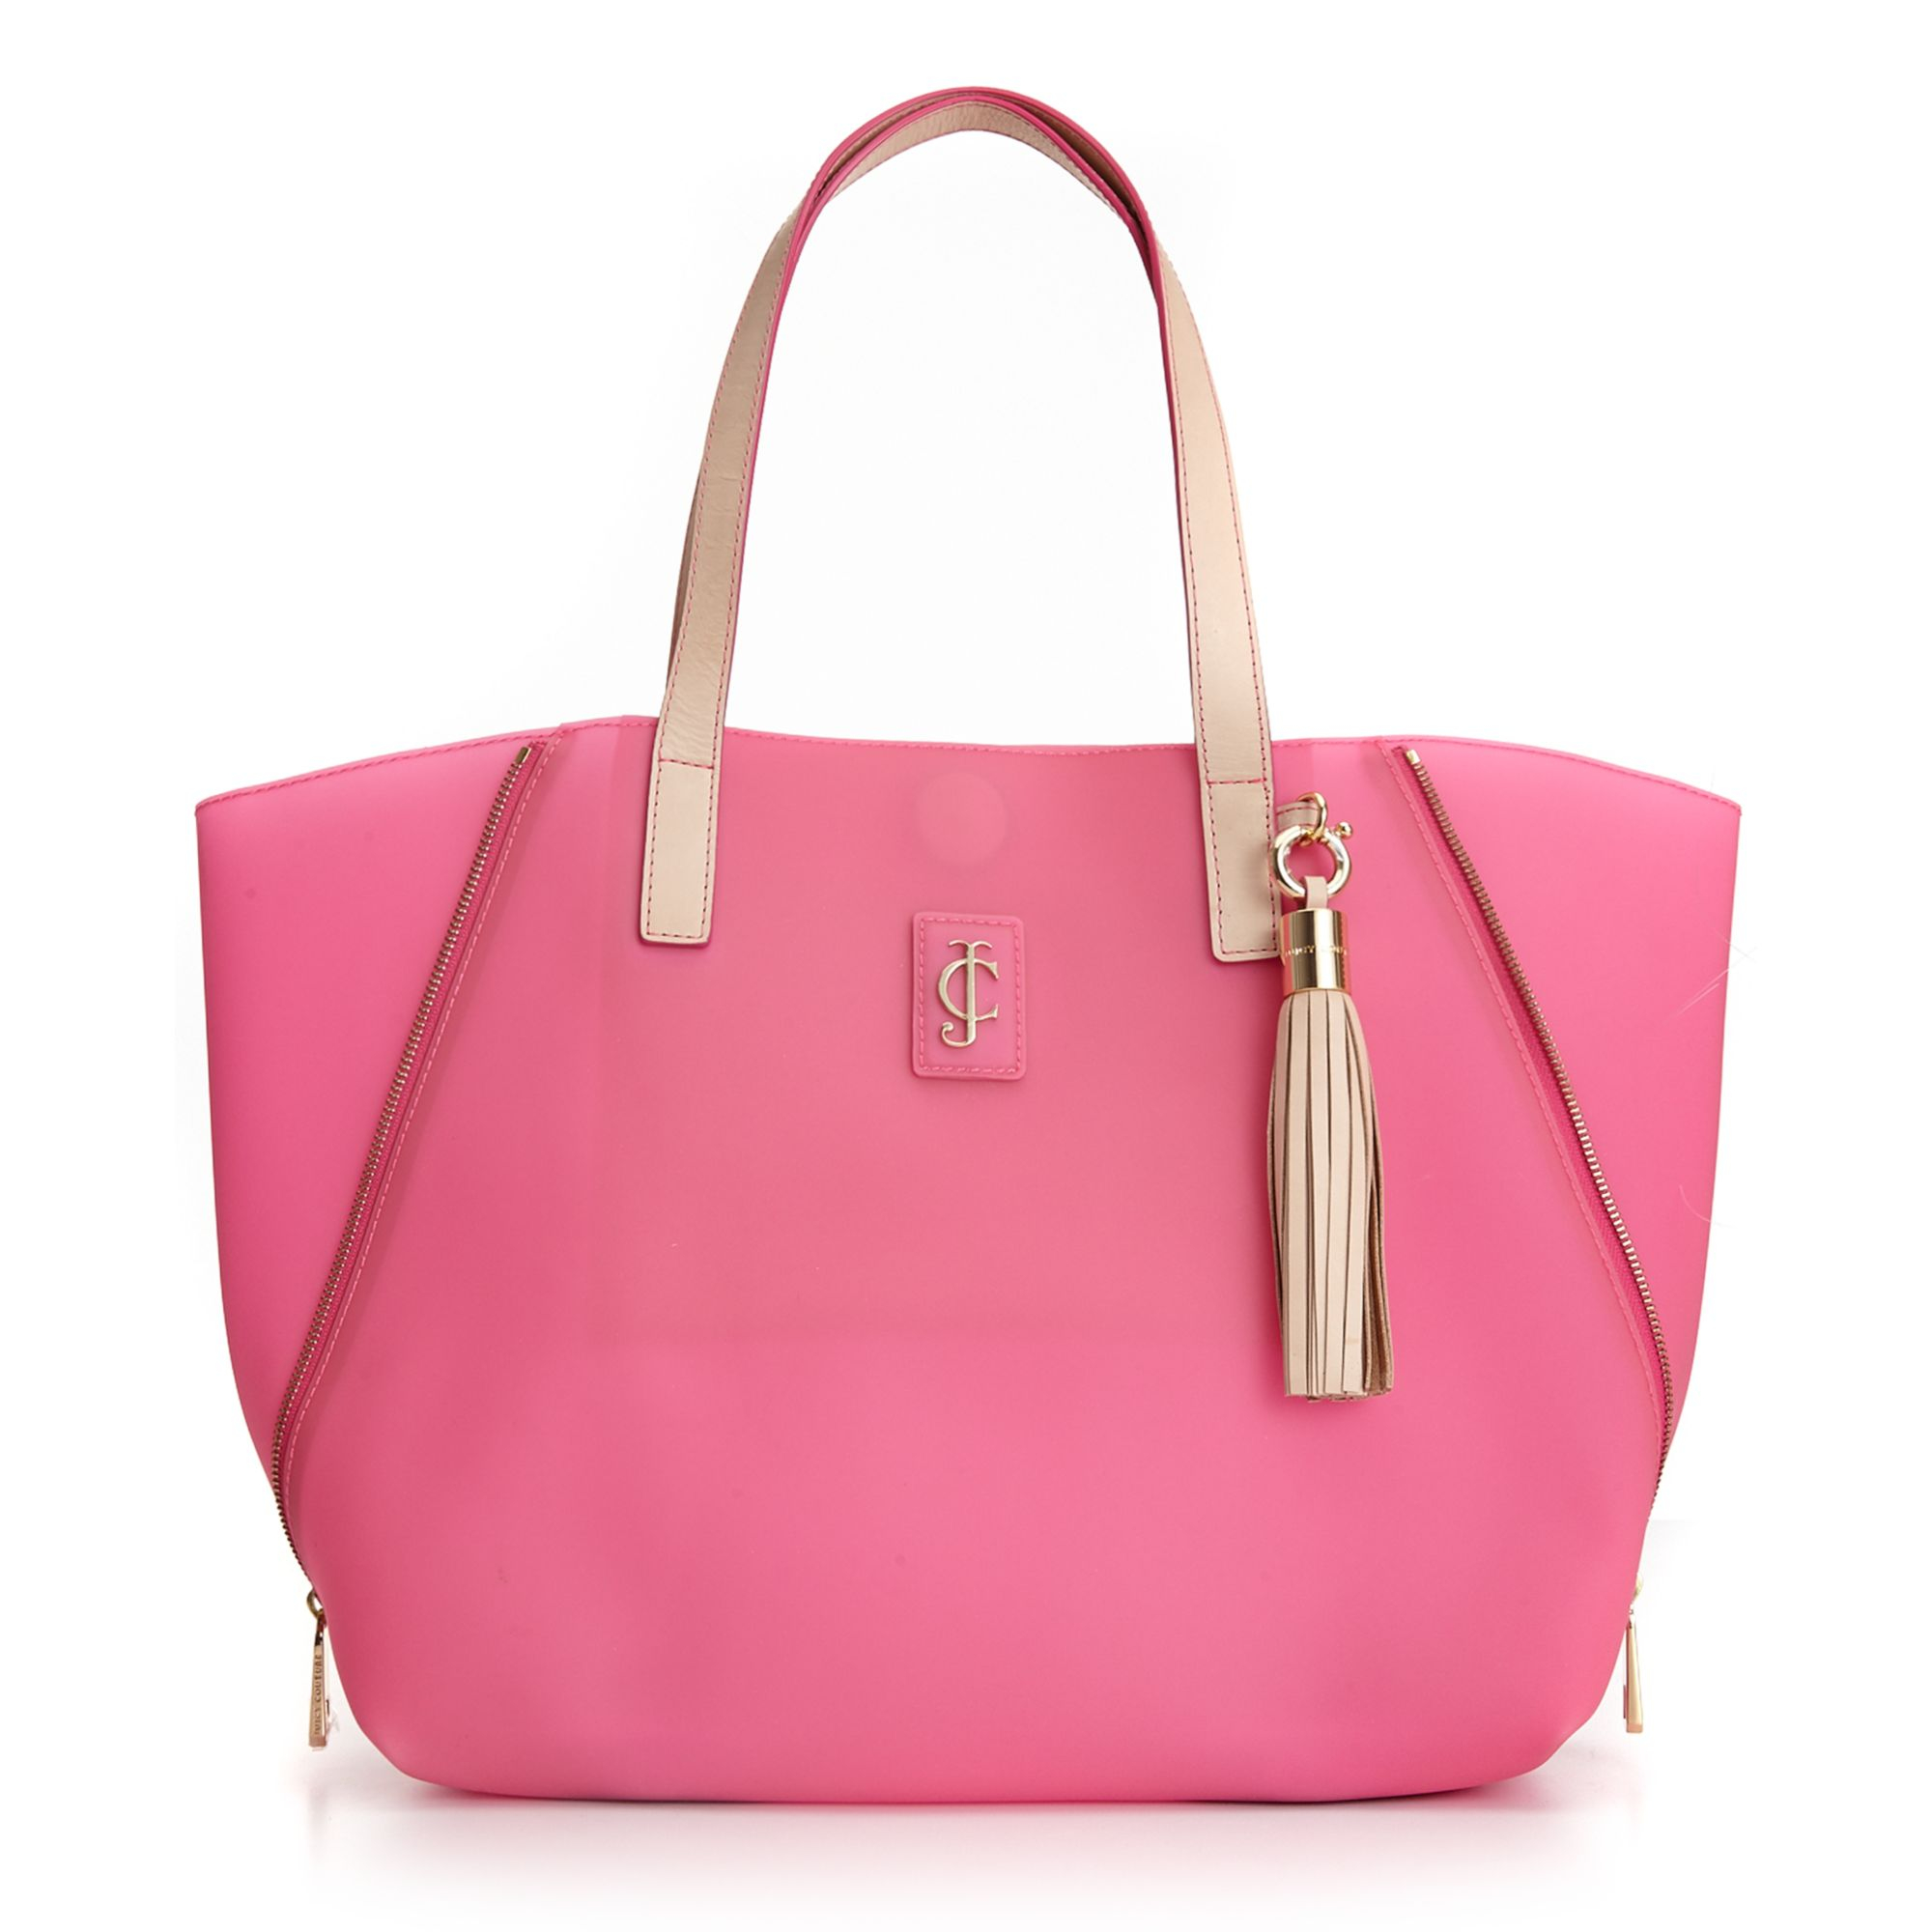 Juicy Couture Pacific Coast Tote In Pink Hot Pink Lyst